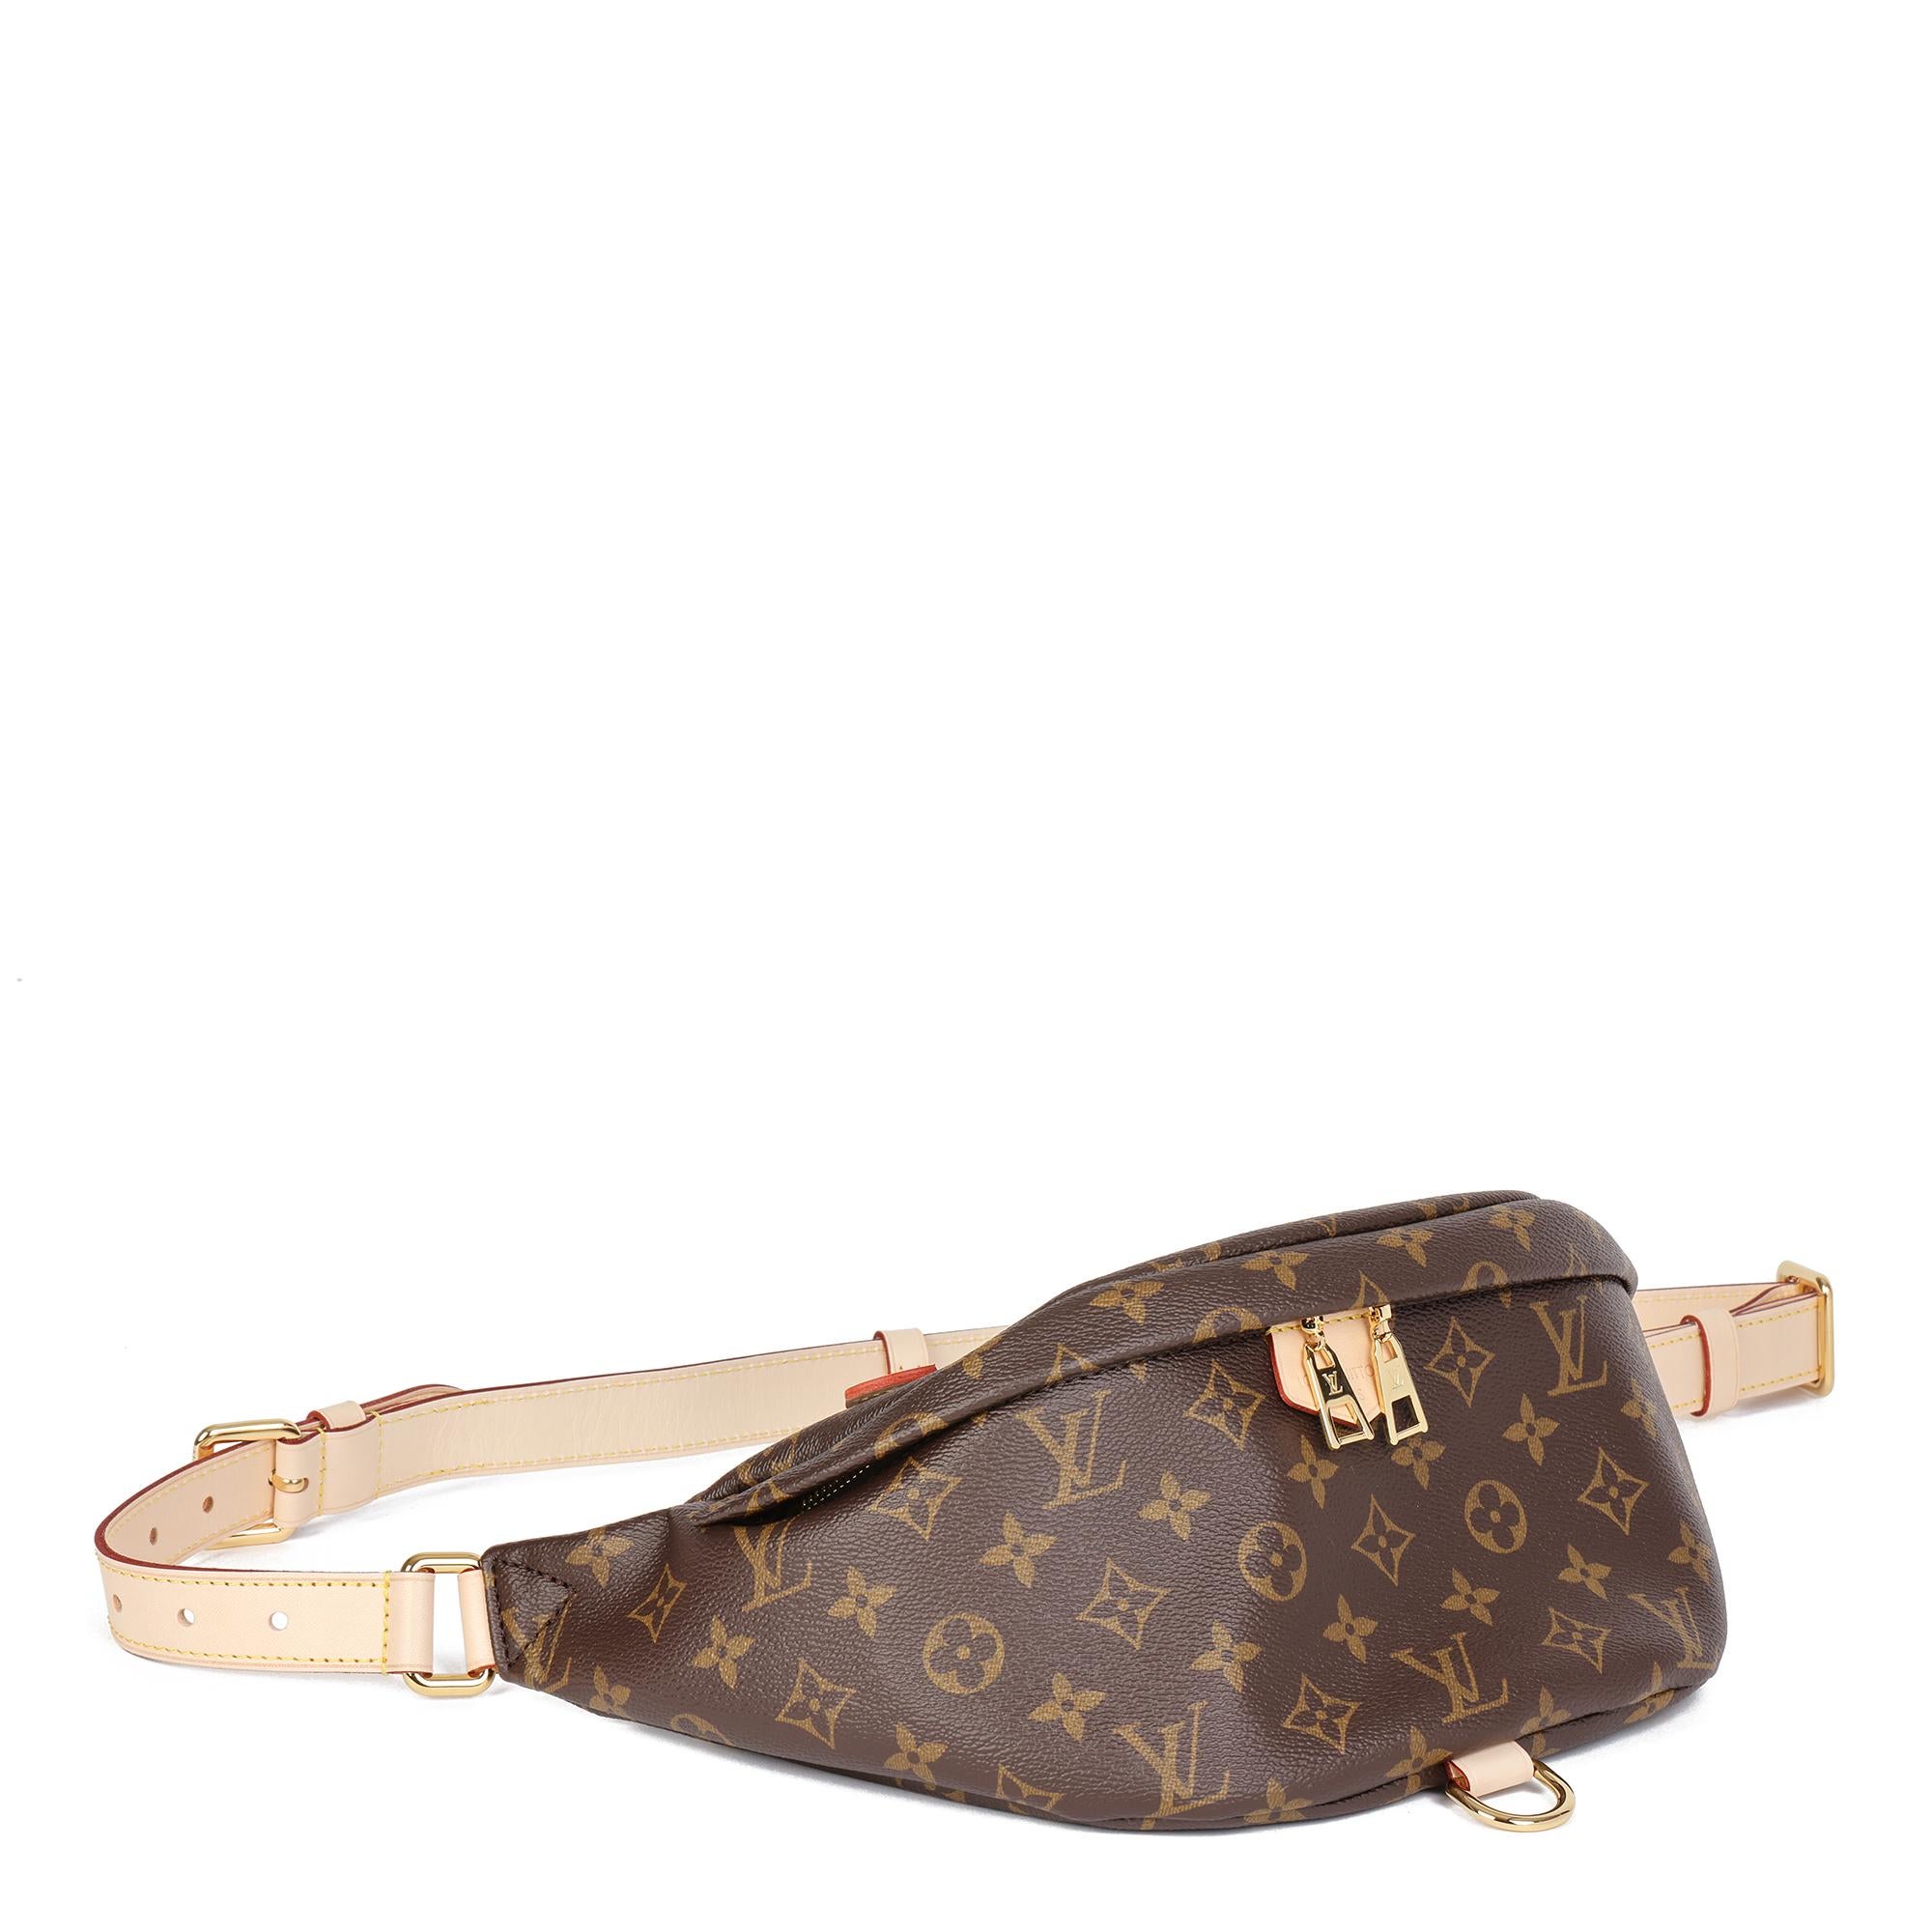 LOUIS VUITTON
Brown Monogram Coated Canvas & Vachetta Leather Bum Bag

Xupes Reference: HB4540
Age (Circa): 2022
Accompanied By: Louis Vuitton Dust Bag, Box, Tag
Authenticity Details: (Made in Spain)
Gender: Unisex
Type: Belt Bag, Crossbody

Colour: